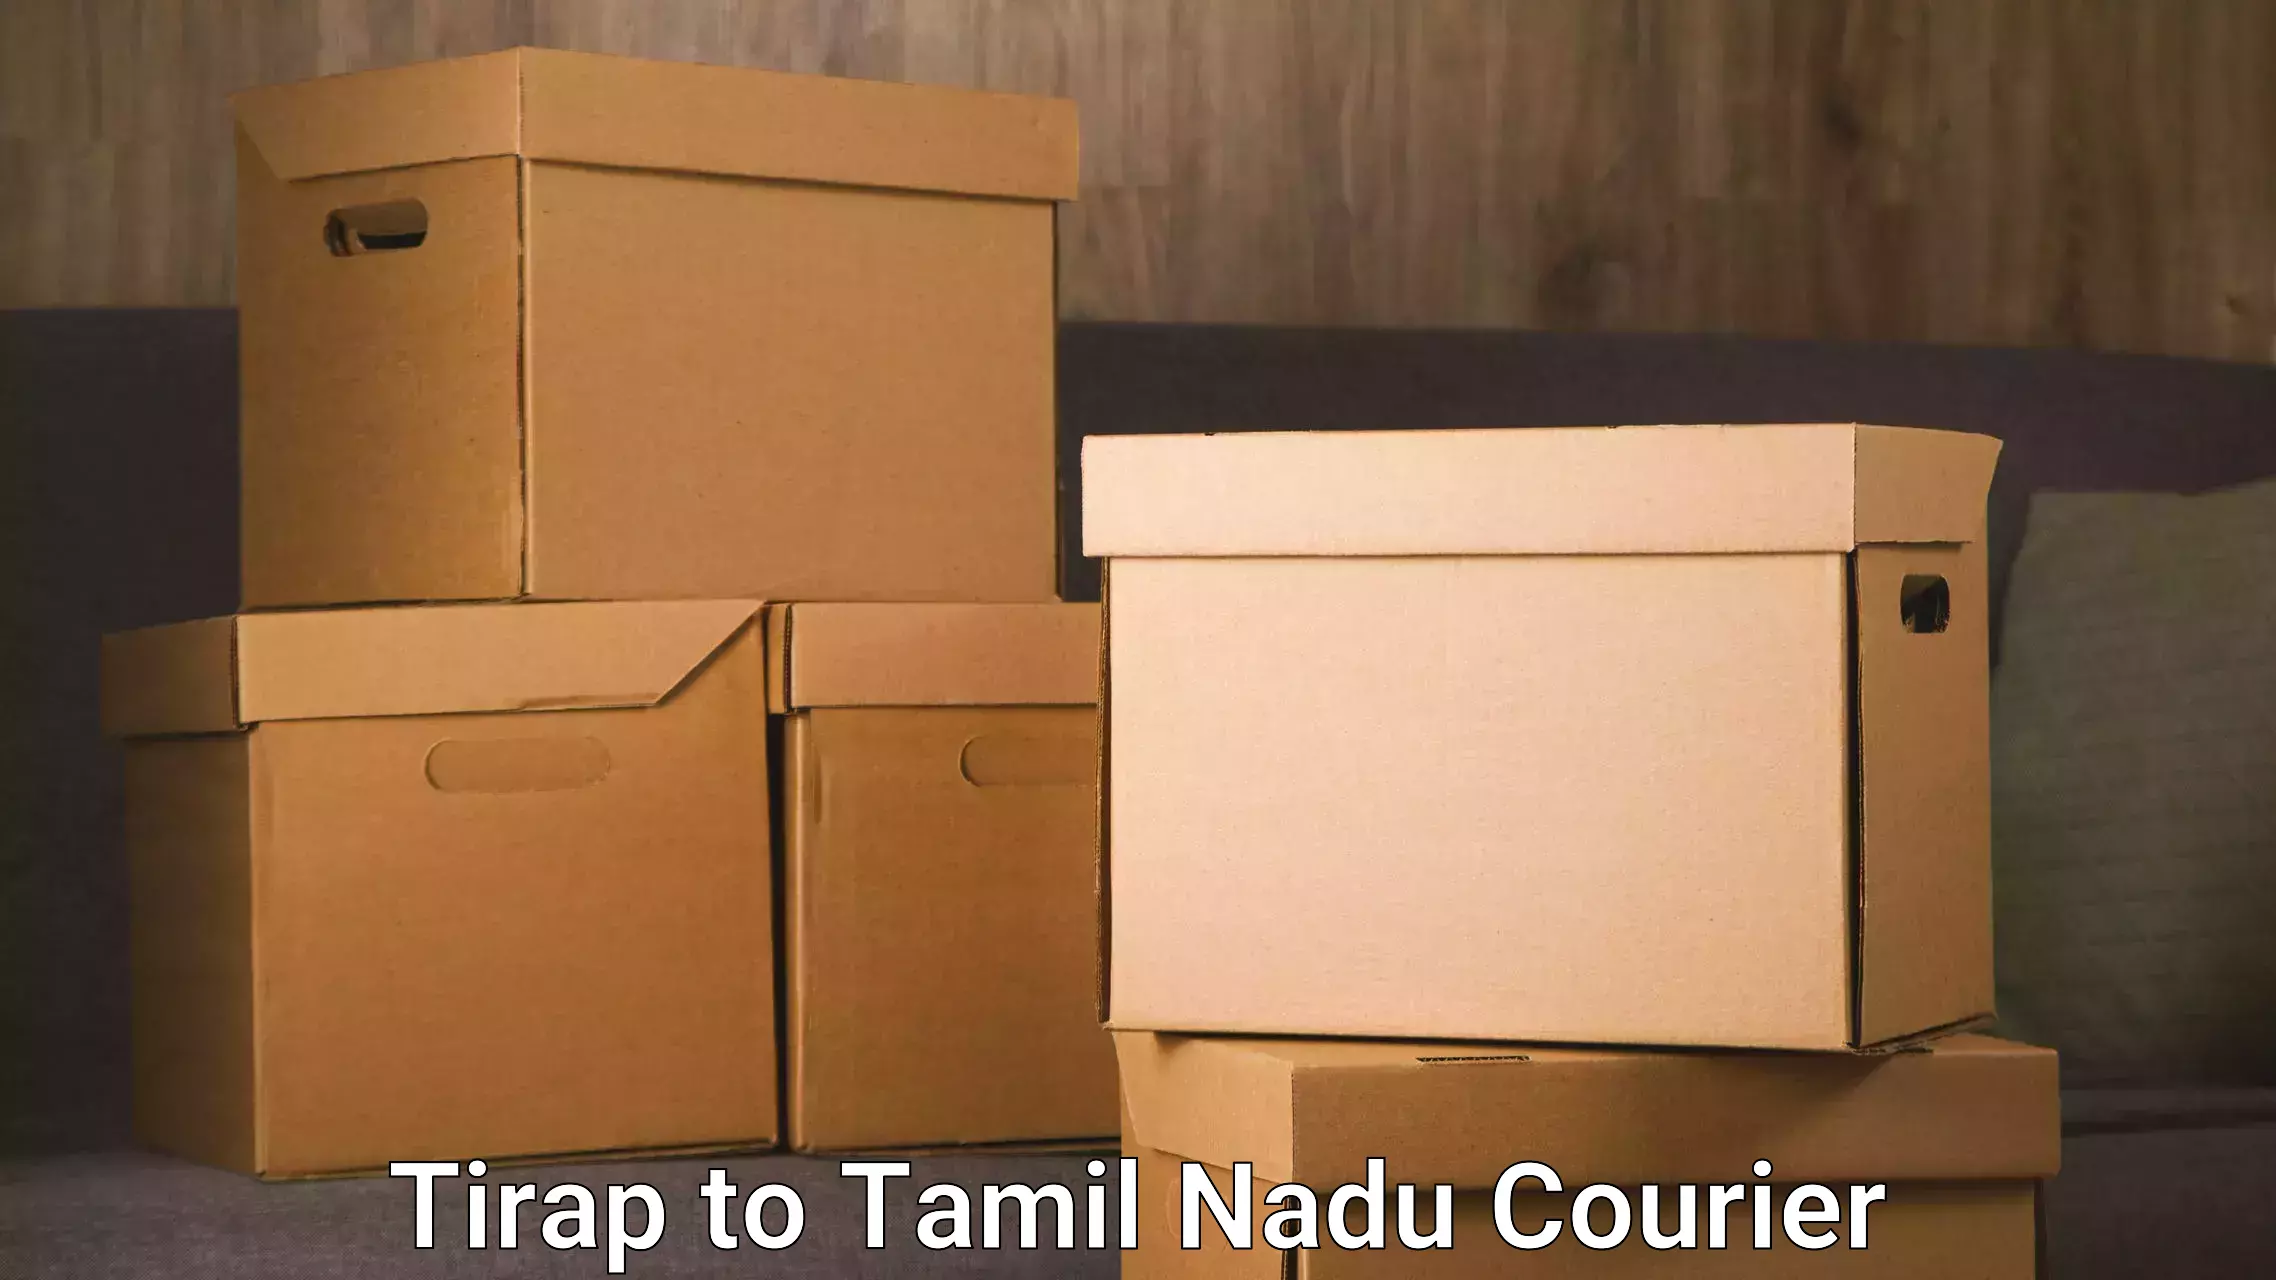 Nationwide delivery network Tirap to Tamil Nadu